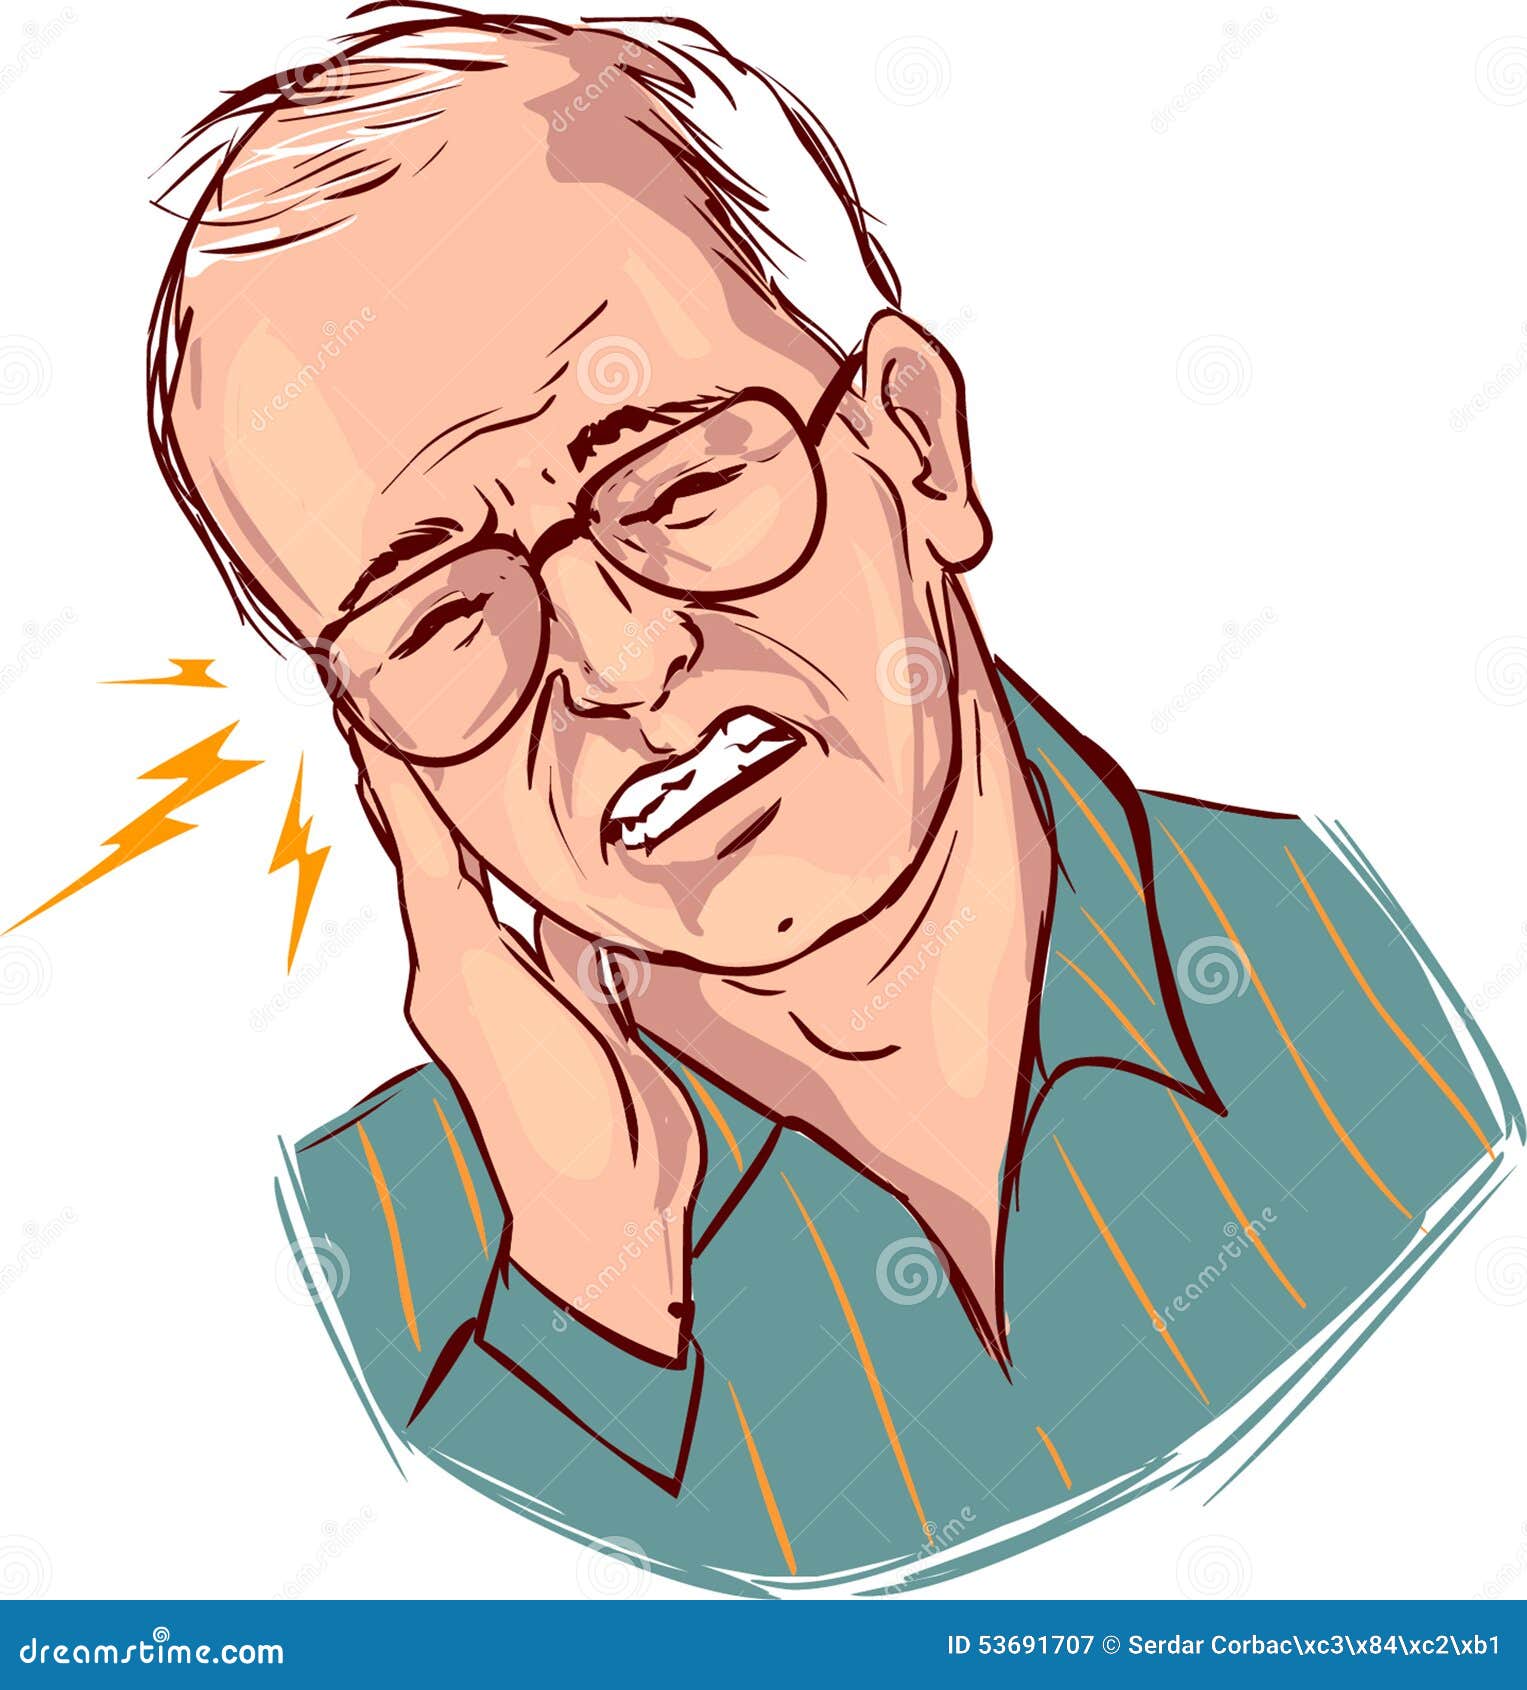 clipart toothache - photo #44